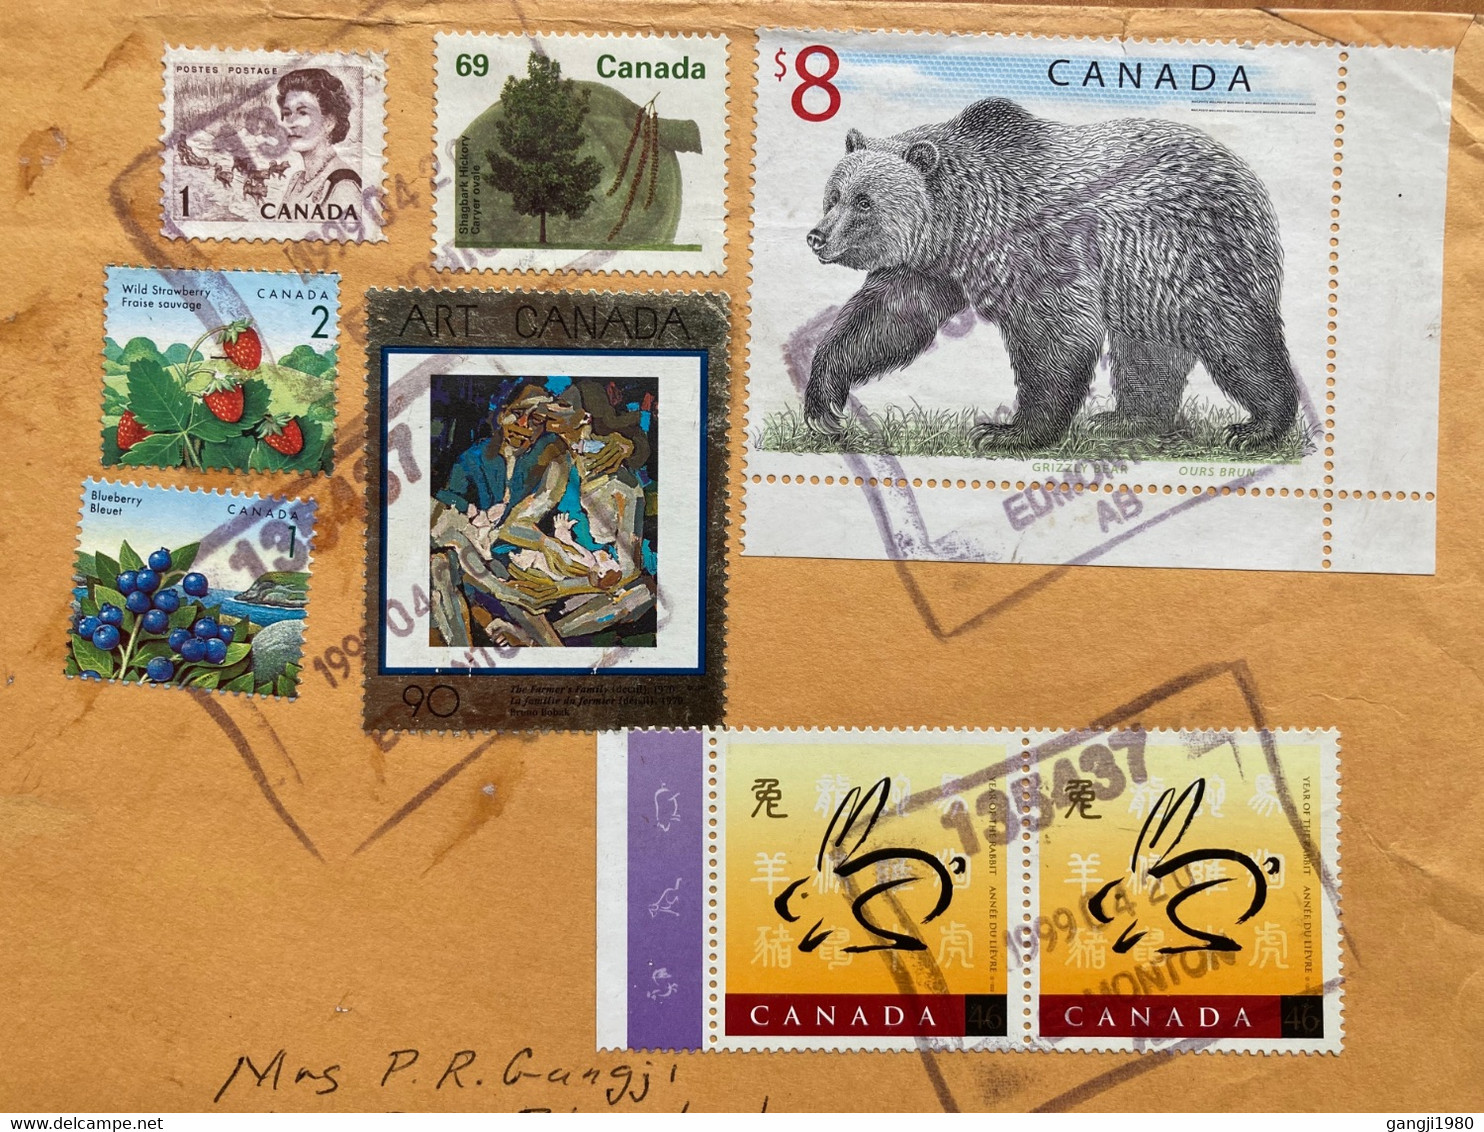 CANADA 1999, HIGH VALUE 8$ BEAR ANIMAL, HARE, RABBIT, ART, TREE, PAINTING, QUEEN, FRUIT, MOTHER & CHILD, 8 STAMP, COVER - Storia Postale